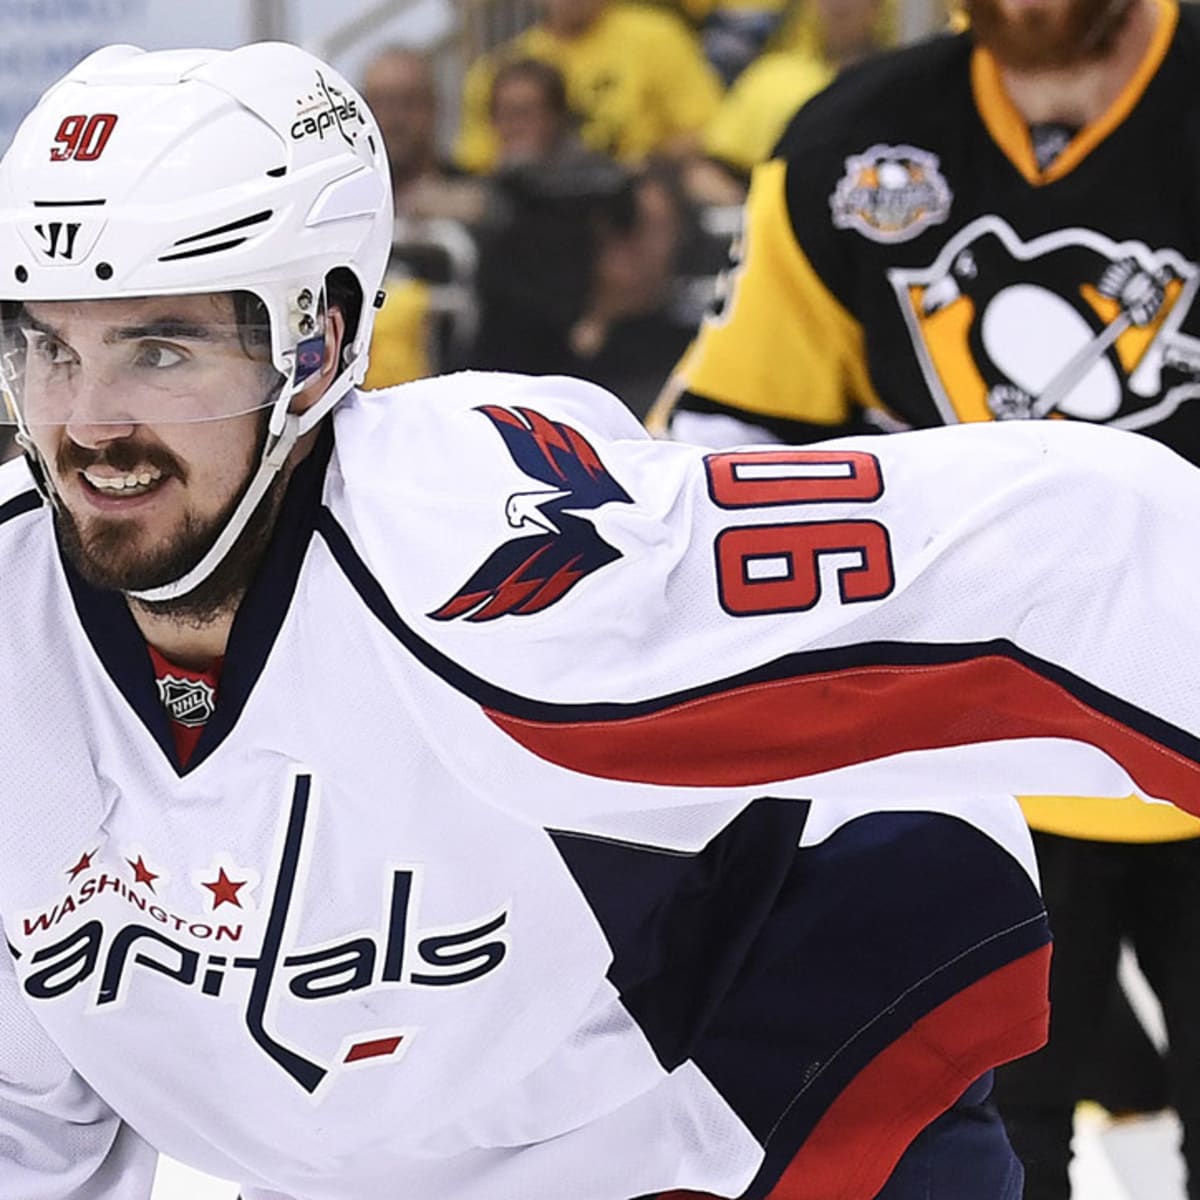 Possible trade targets for the Sabres after signing Marcus Johansson